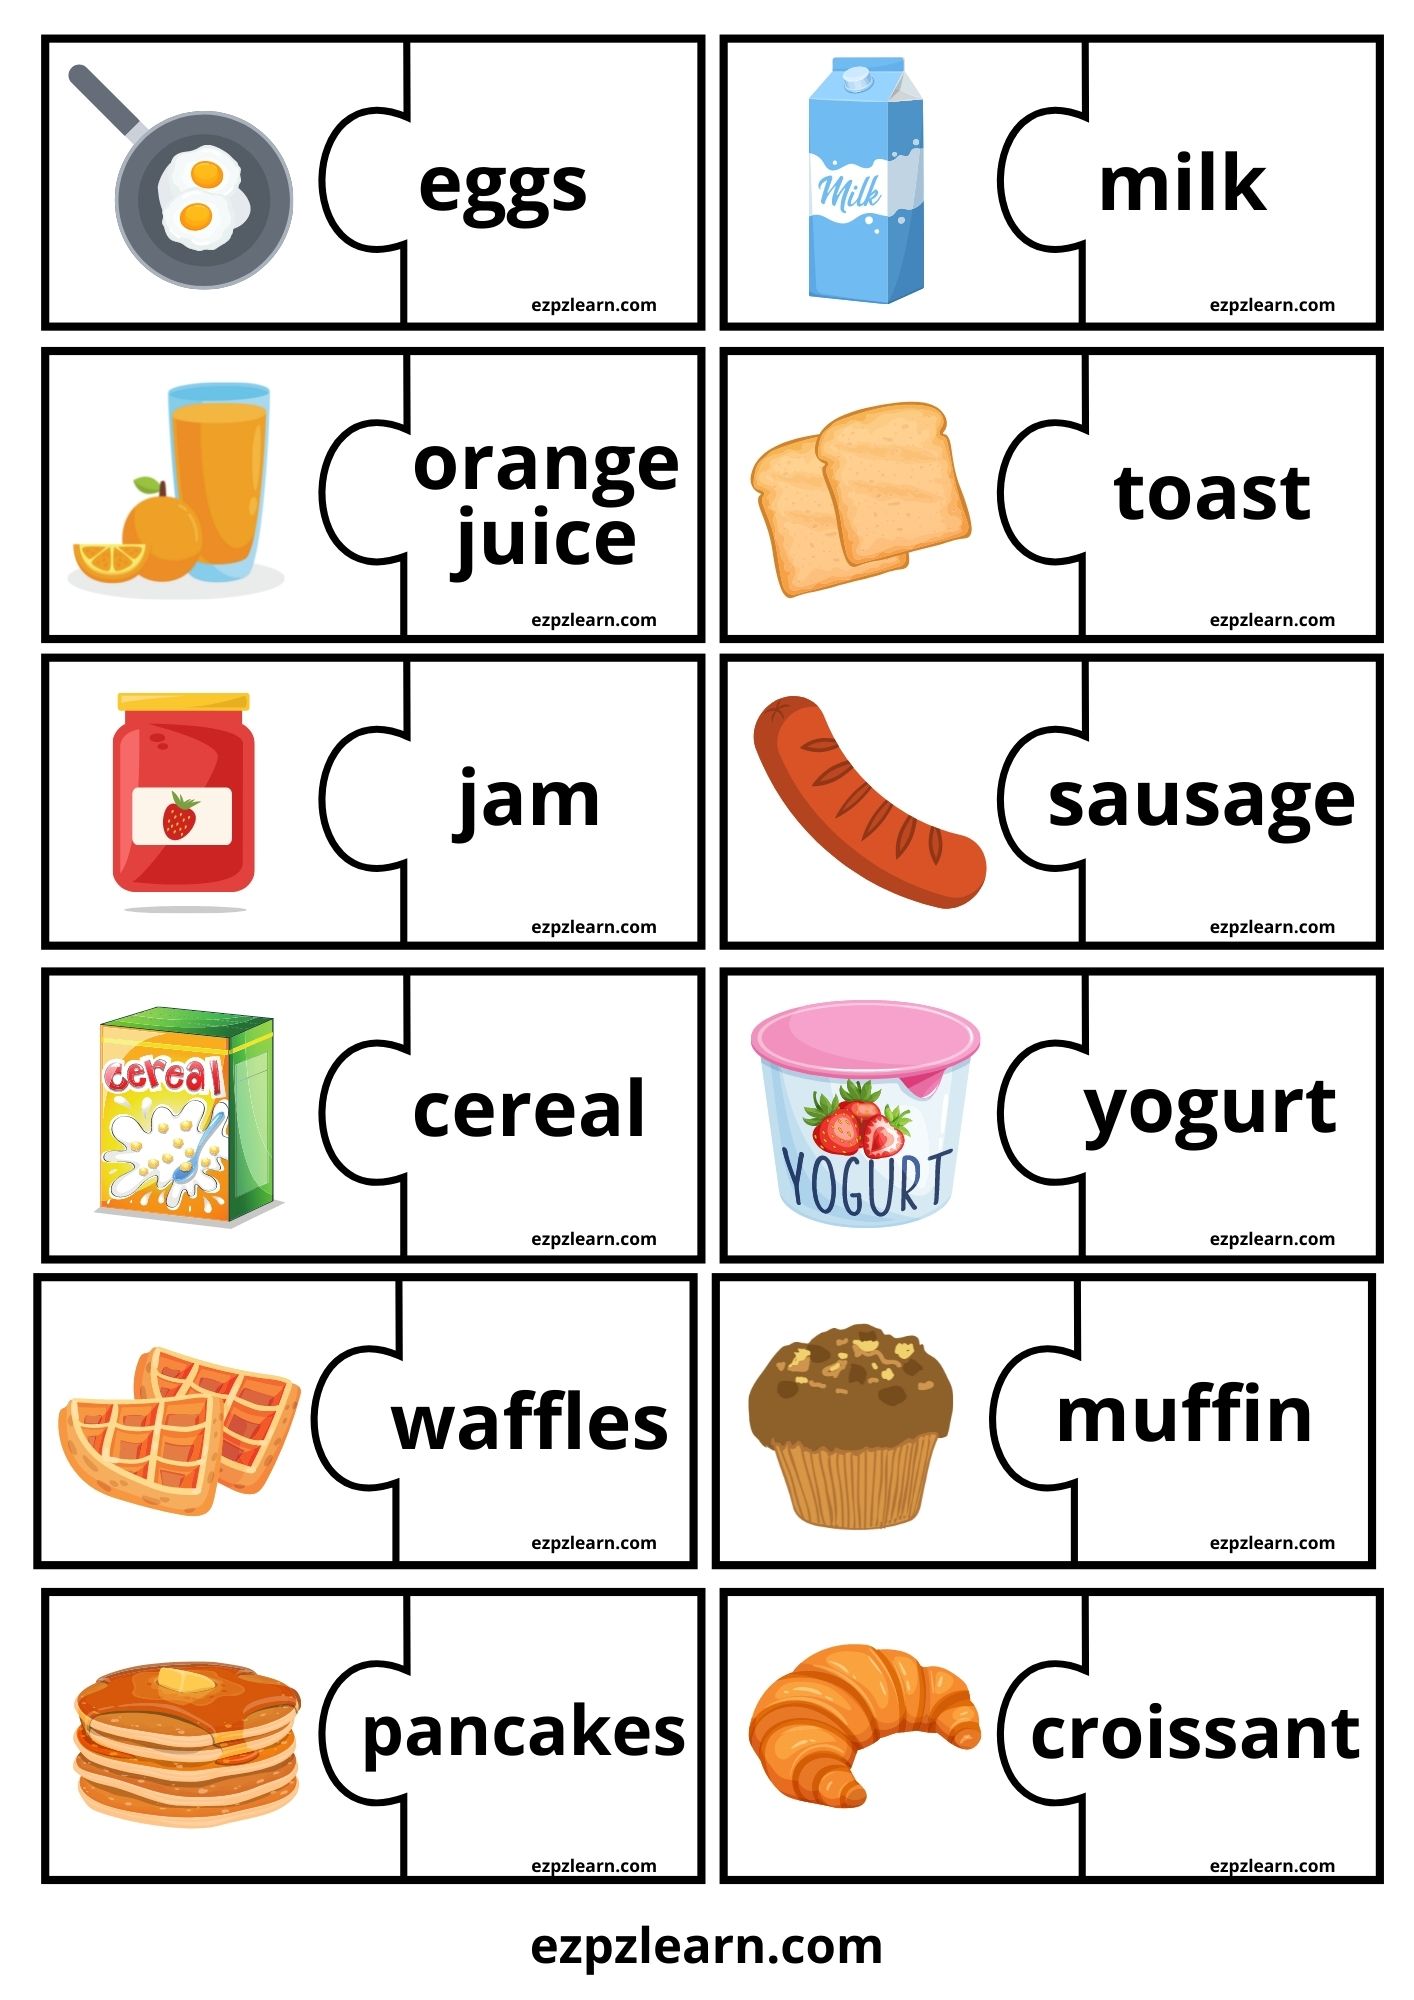 Daily Routine Word Match Game - Ezpzlearn.com  English vocabulary games,  Vocabulary games for kids, English lessons for kids